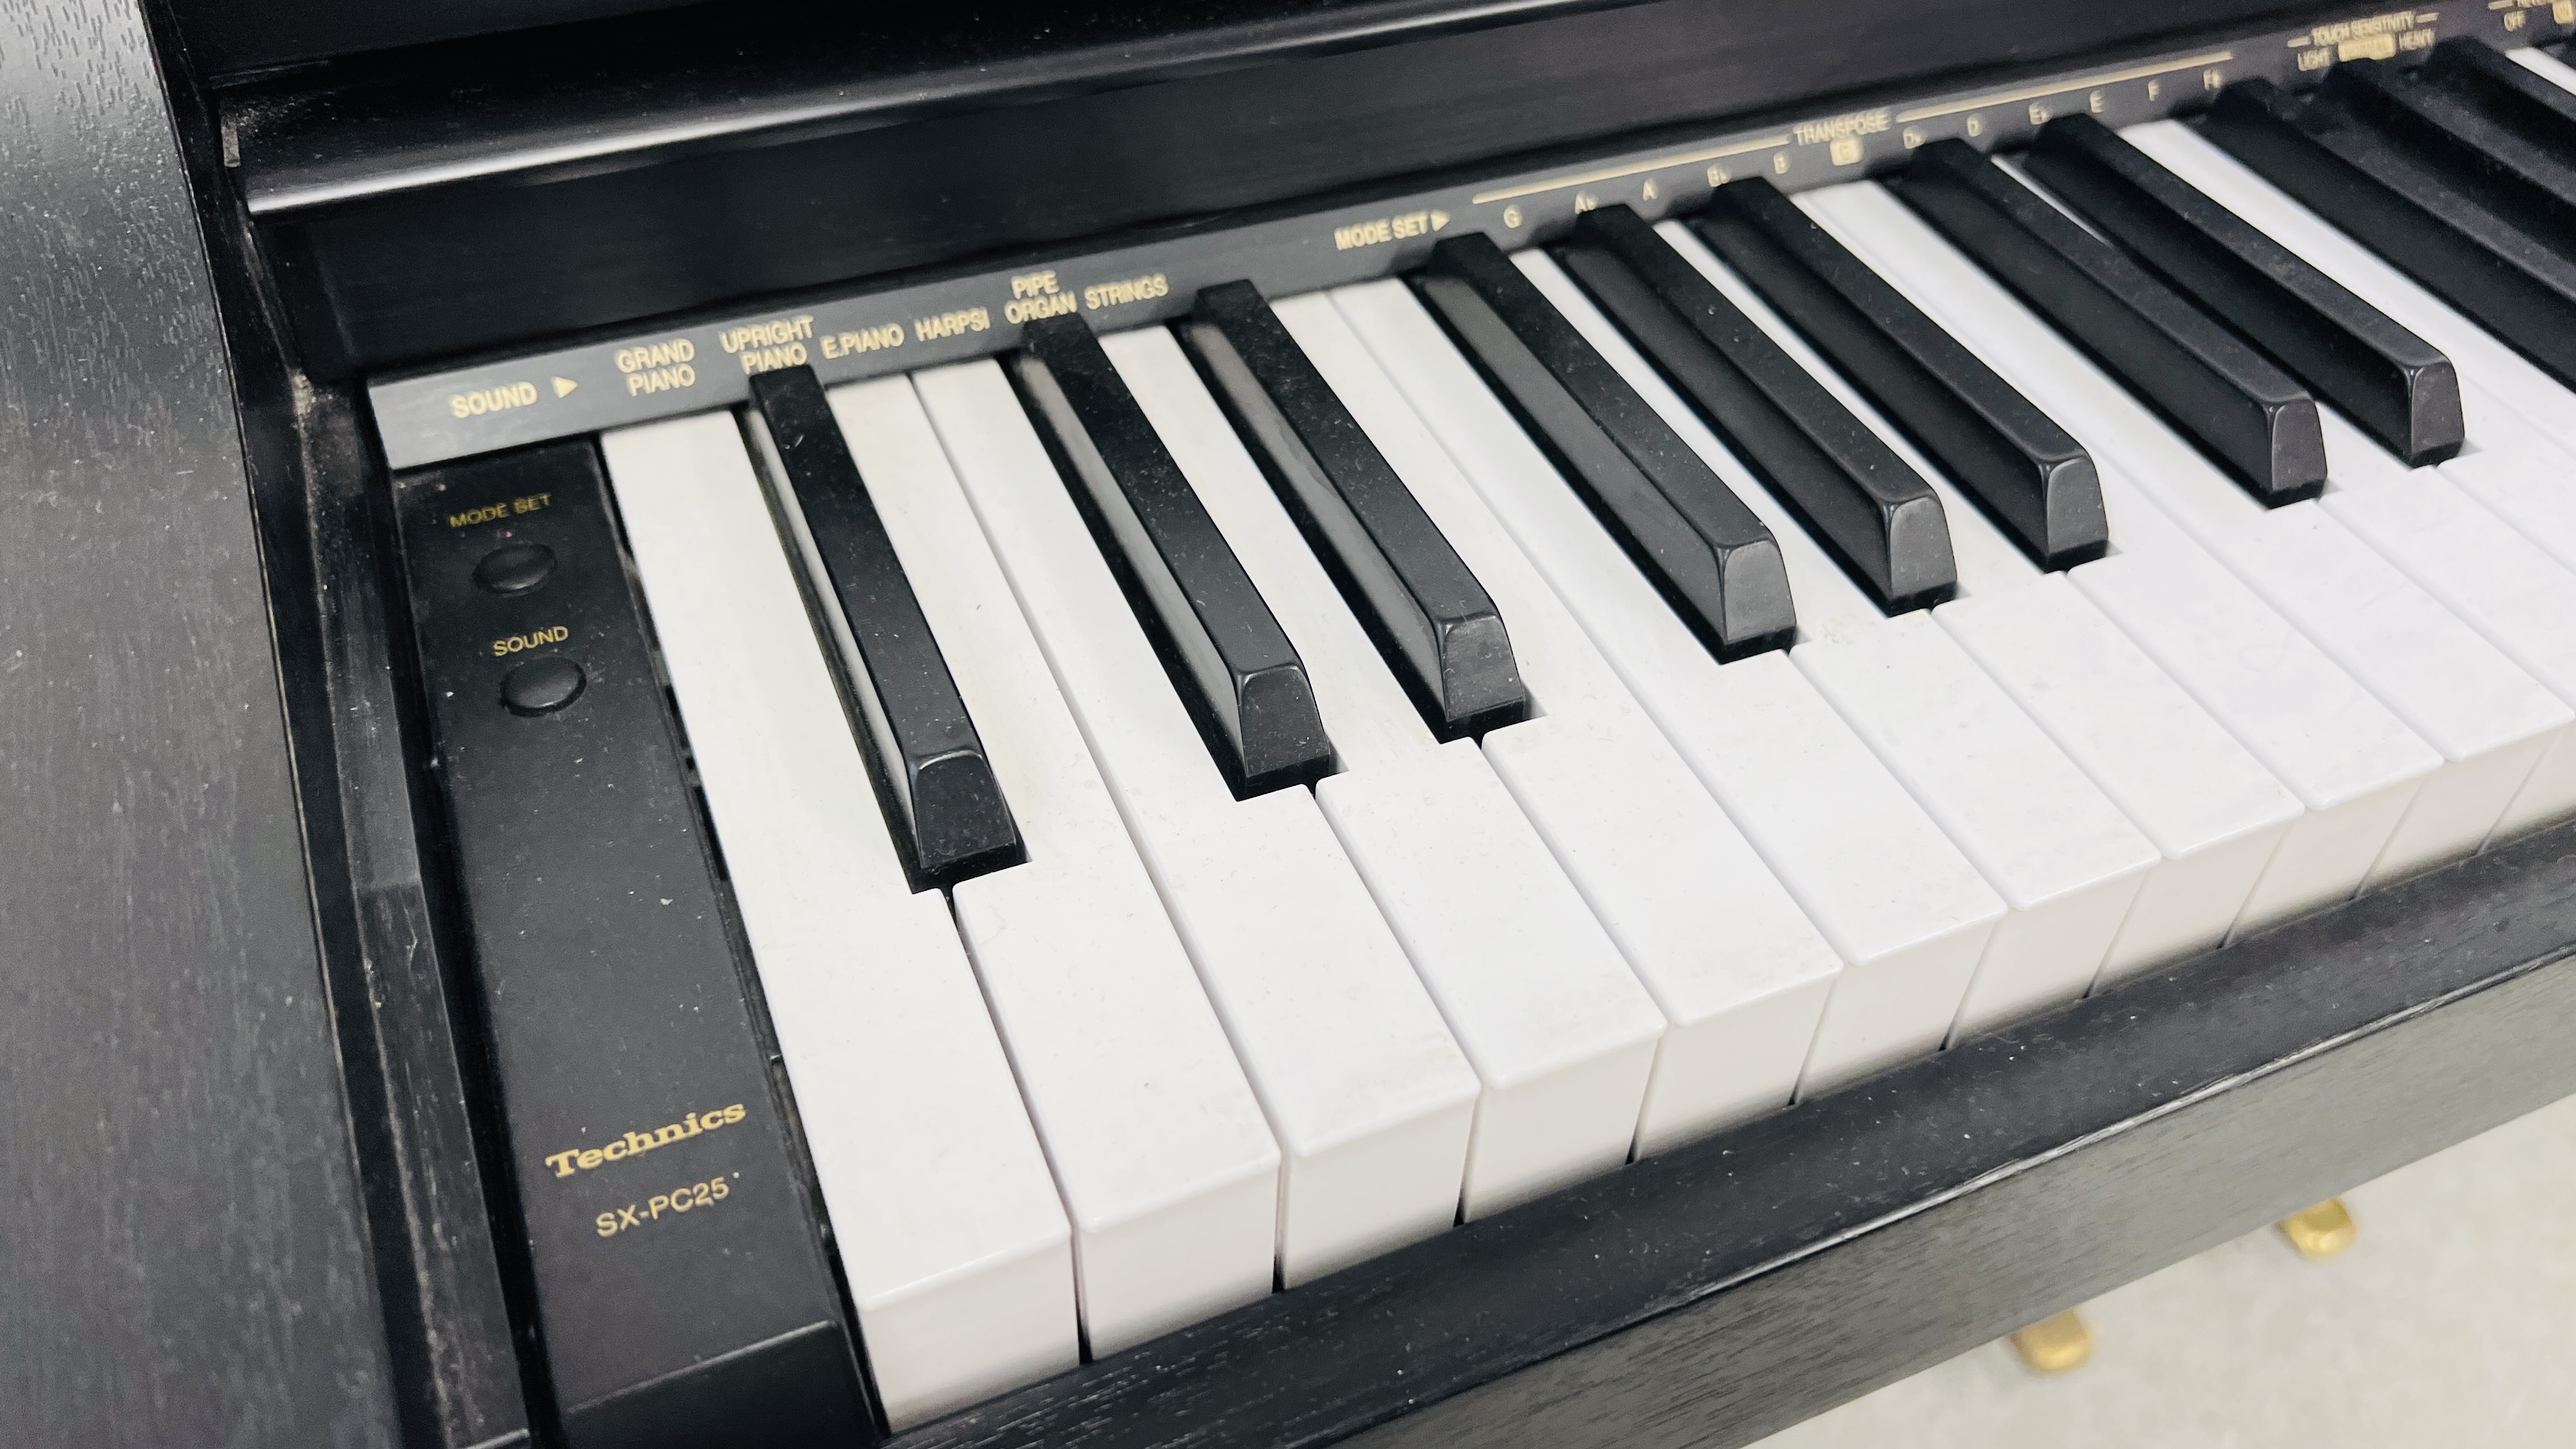 A TECHNICS SX-PC25 DIGITAL PIANO - SOLD AS SEEN - Image 5 of 8